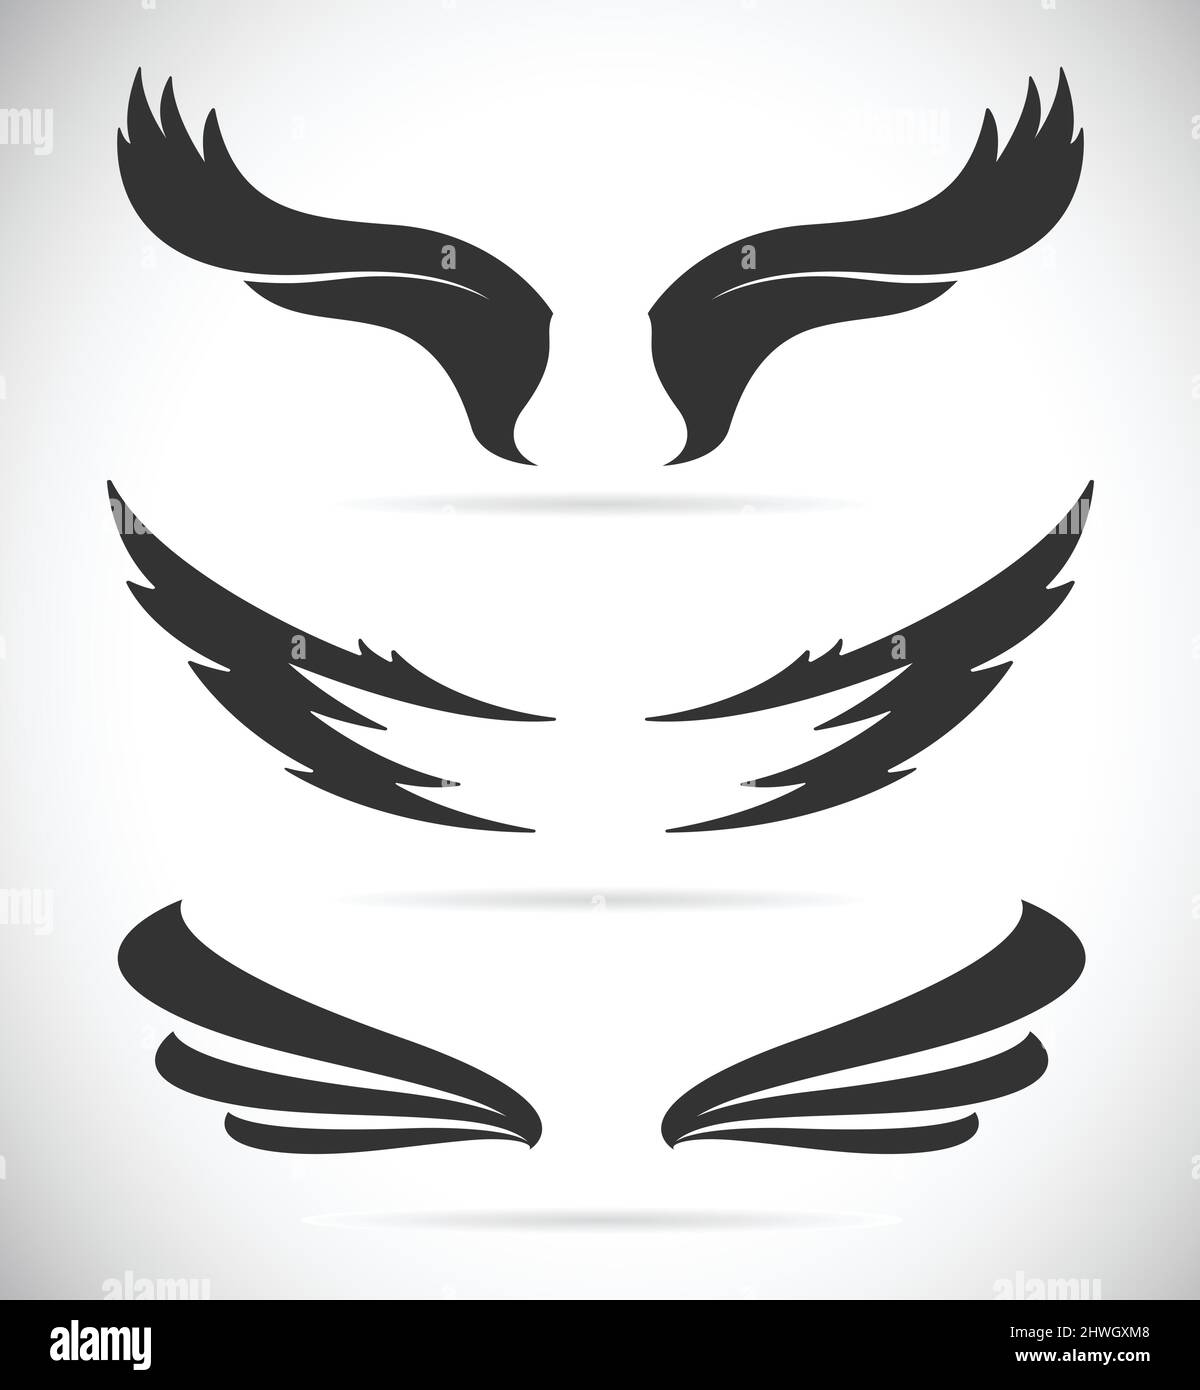 Vector black wing icons set on white background. Easy editable layered vector illustration. Stock Vector